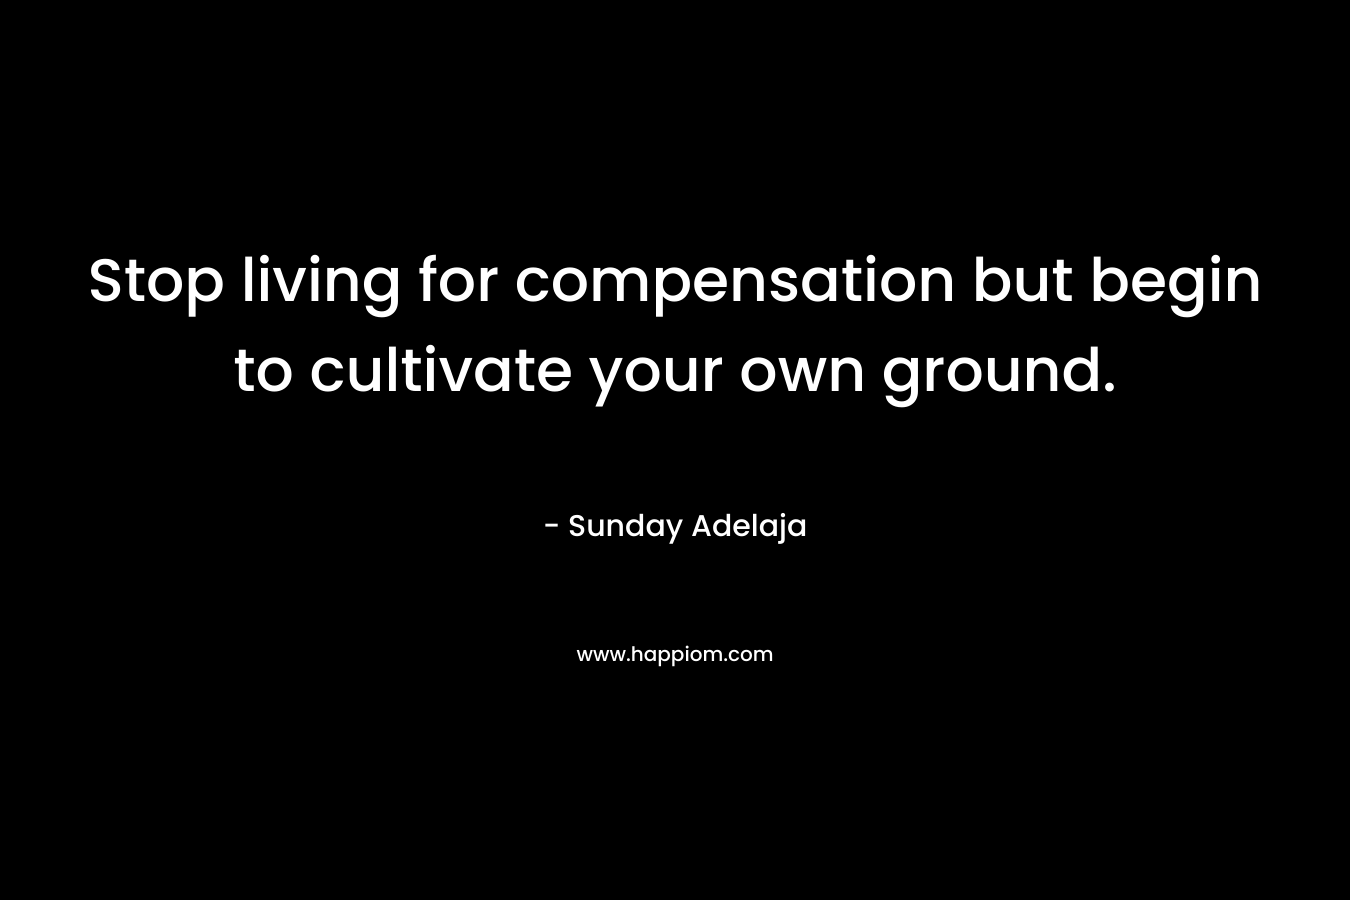 Stop living for compensation but begin to cultivate your own ground.